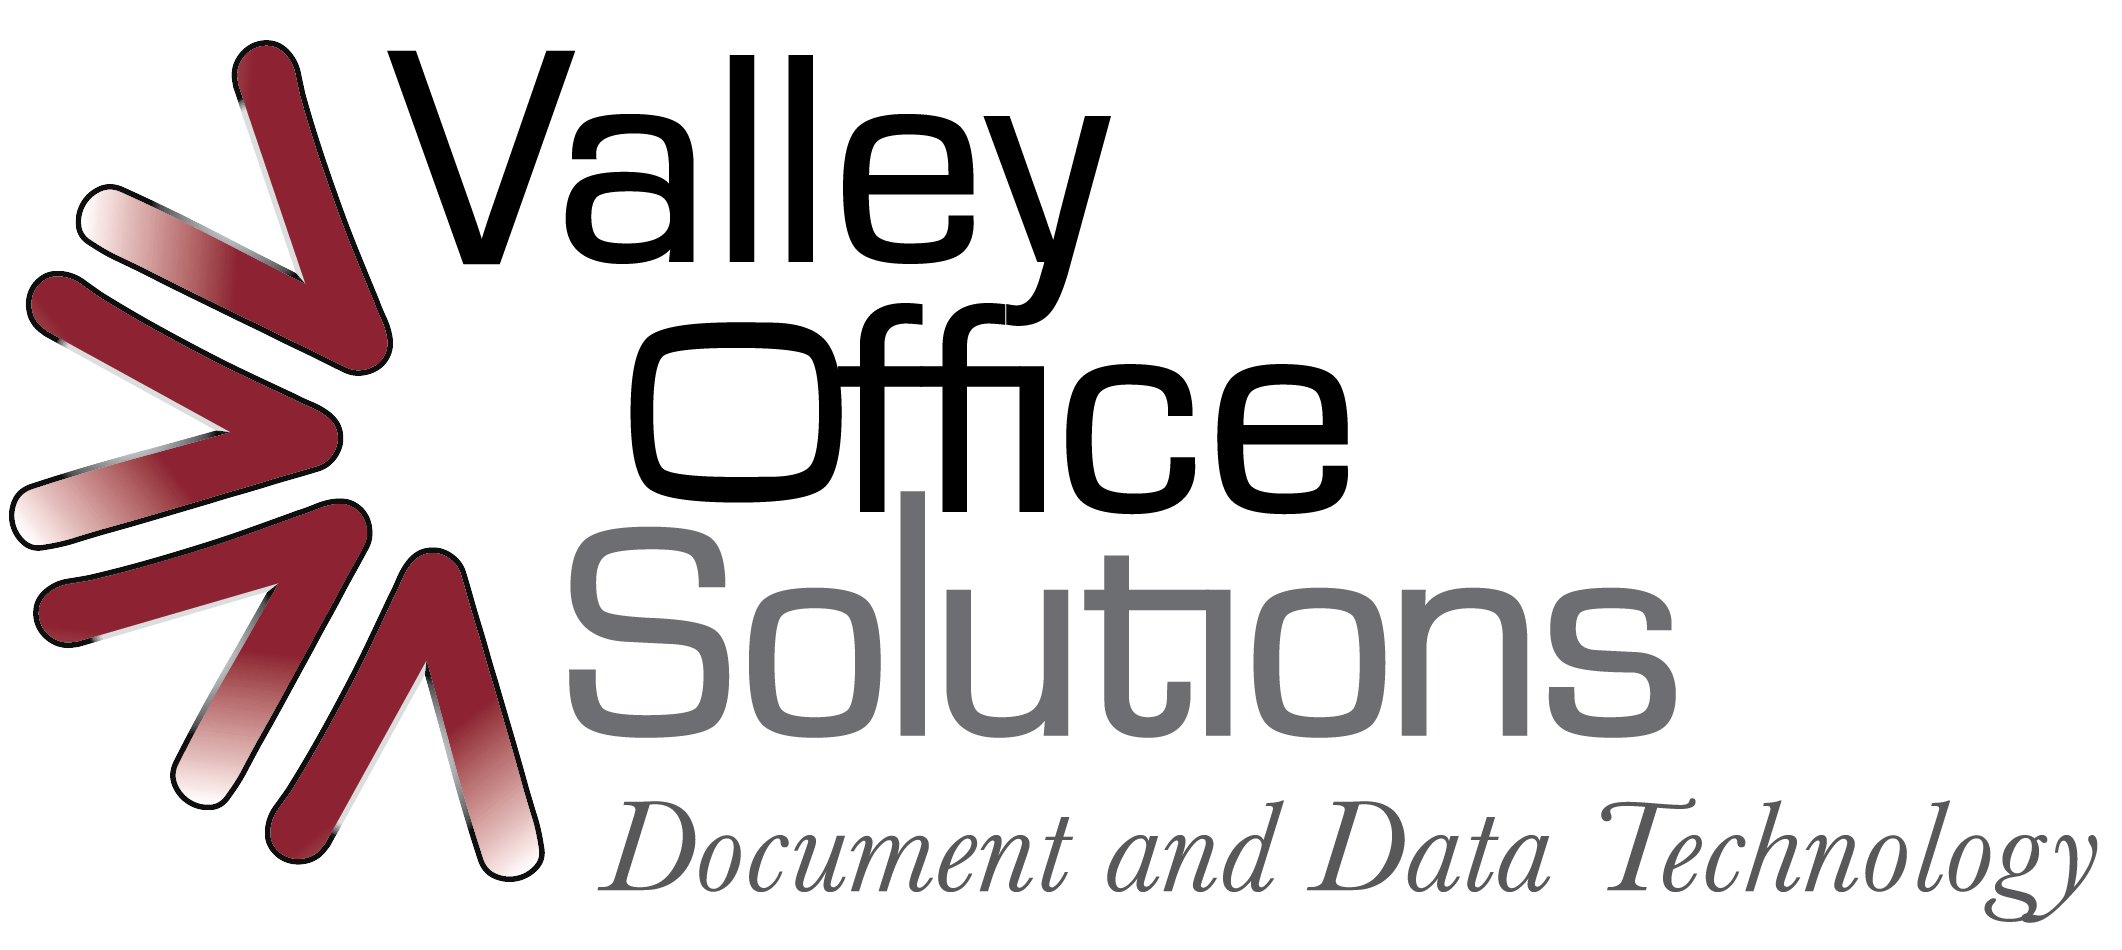 Valley Office